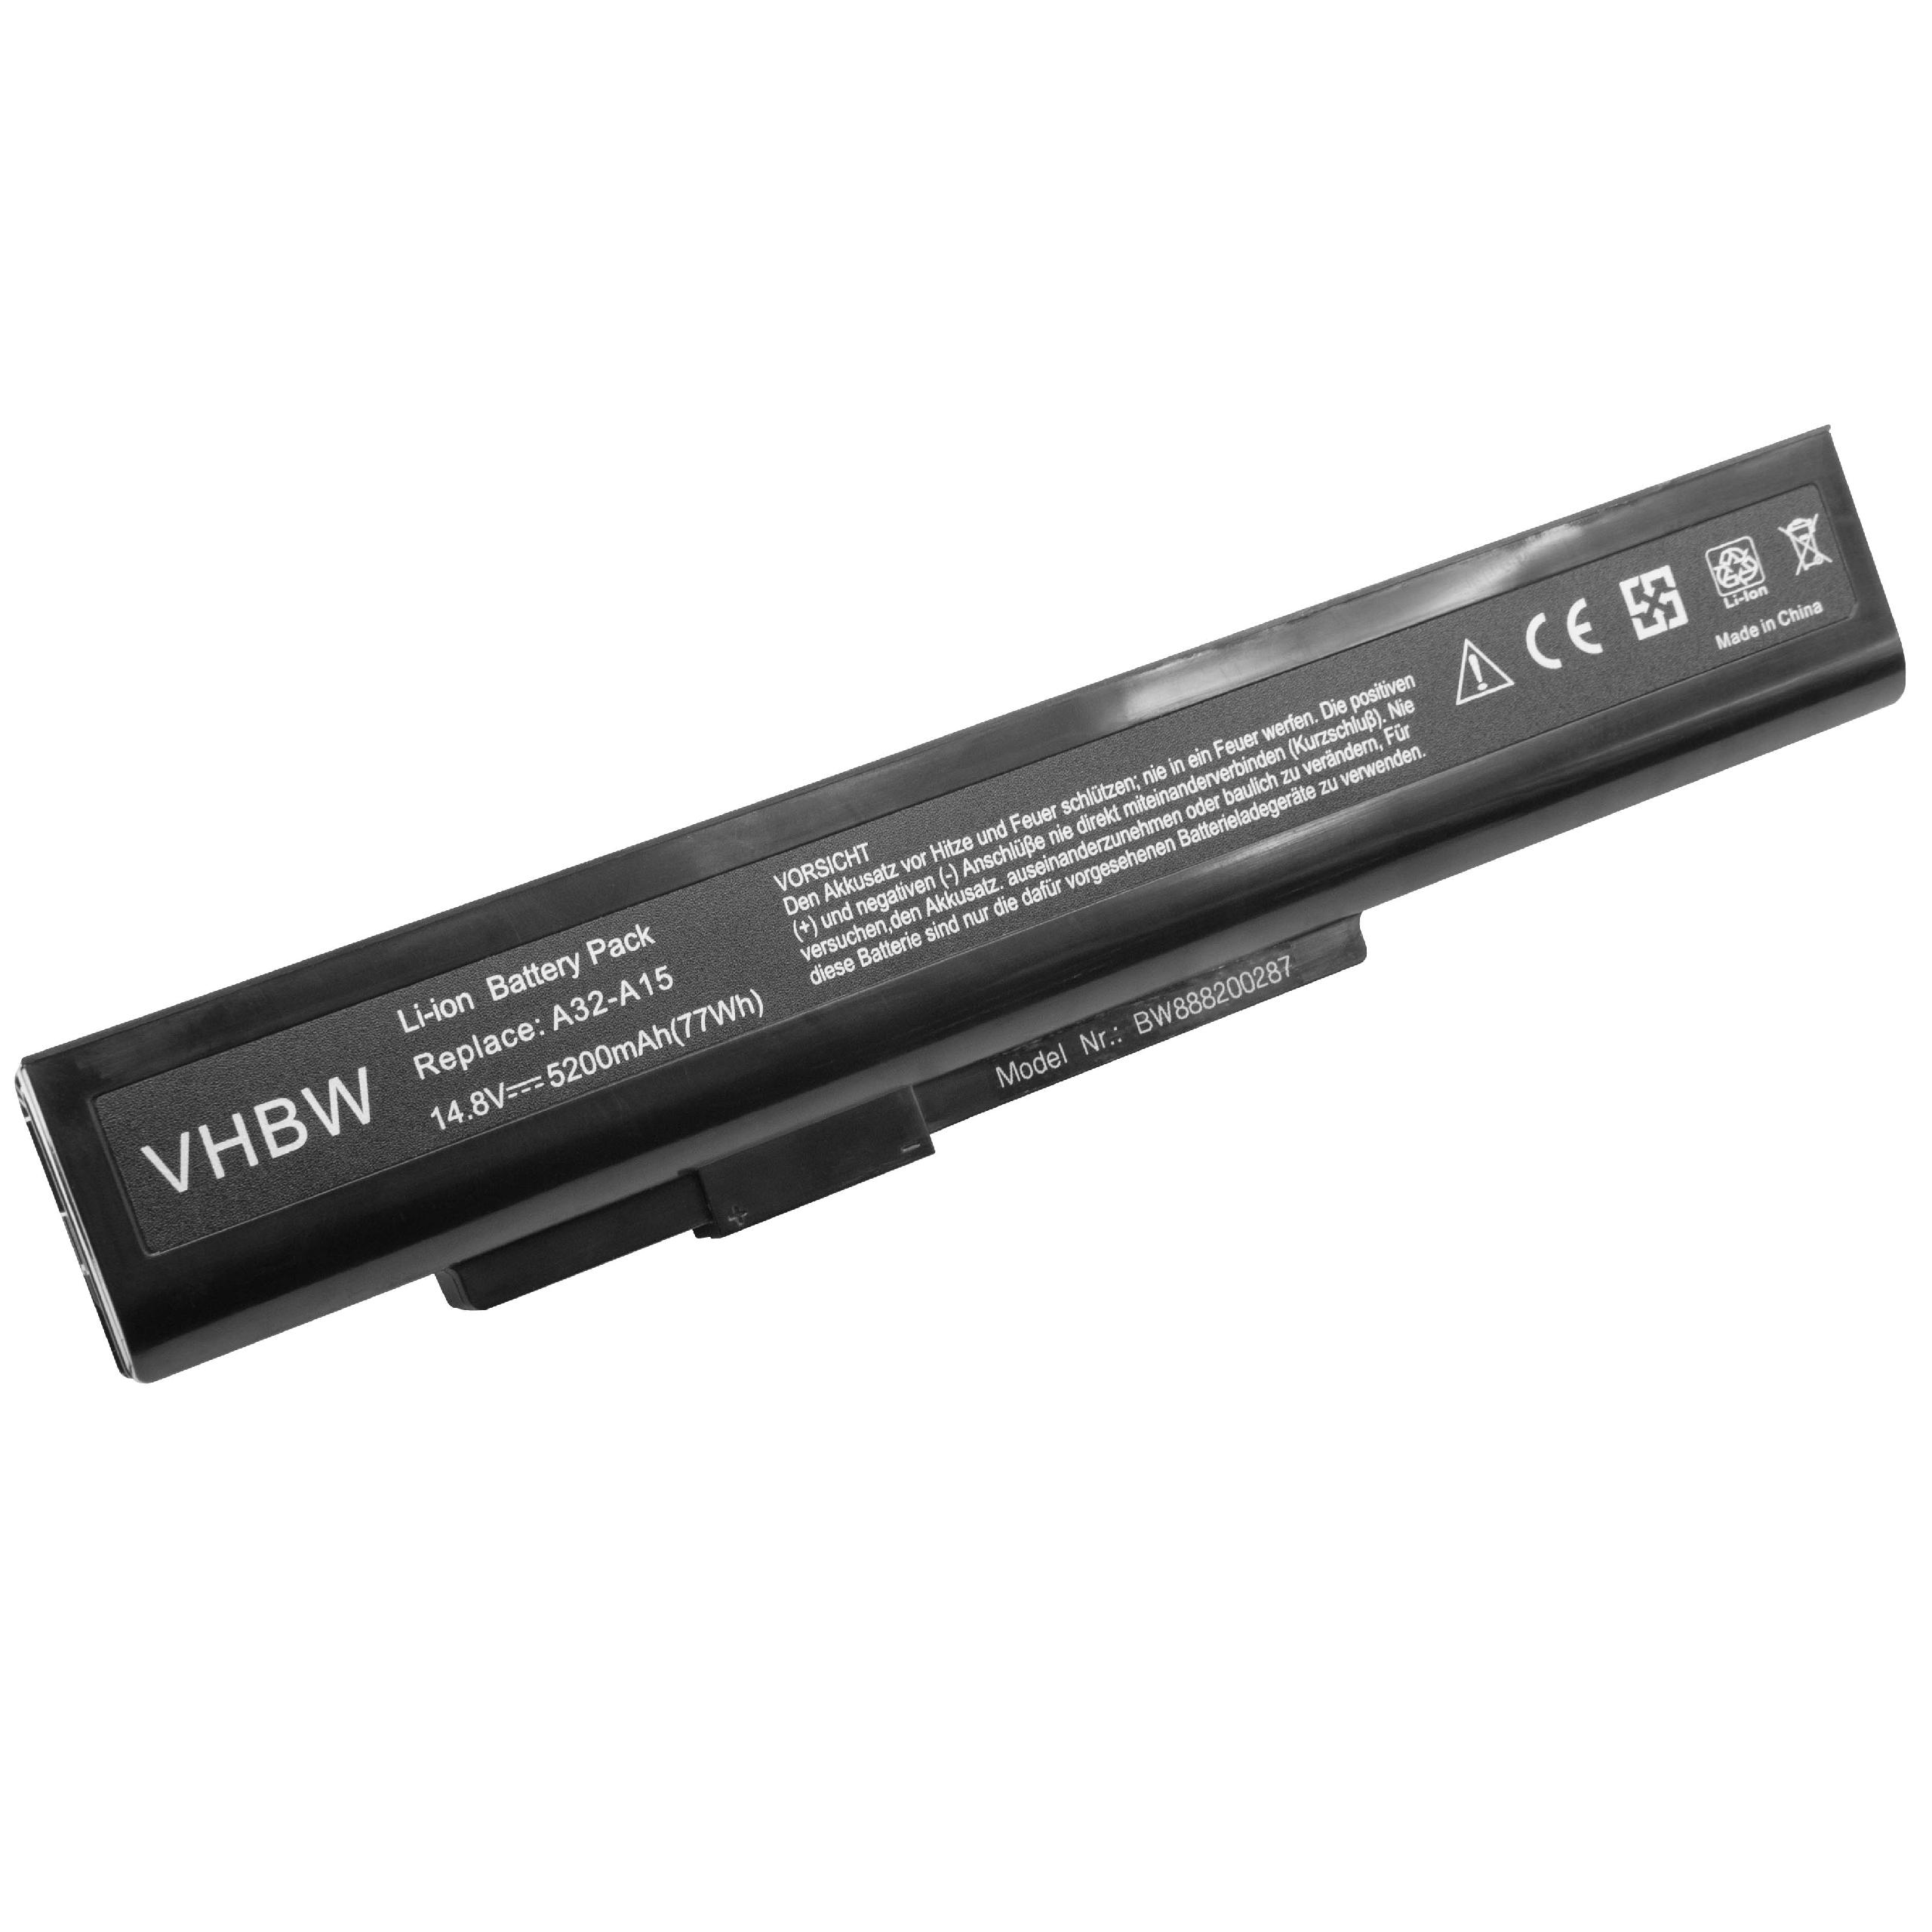 Notebook Battery Replacement for Medion A42-H36, A32-A15, A41-A15, A42-A15 - 5200mAh 14.8V Li-Ion, black